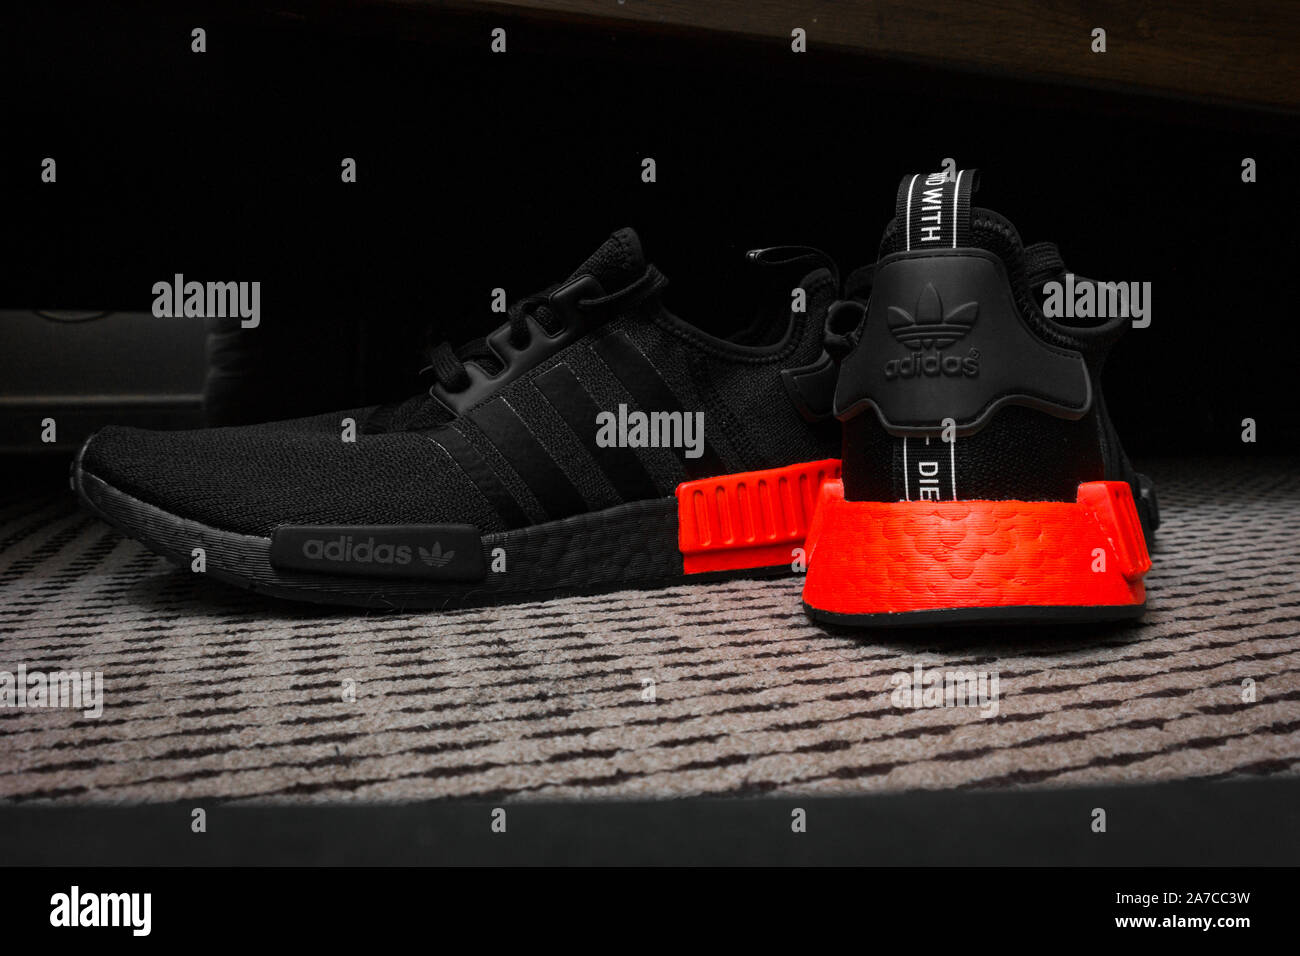 ADIDAS NMD sneakers with ULTRA BOOST technology in all black with red  accent - sports shoes Stock Photo - Alamy